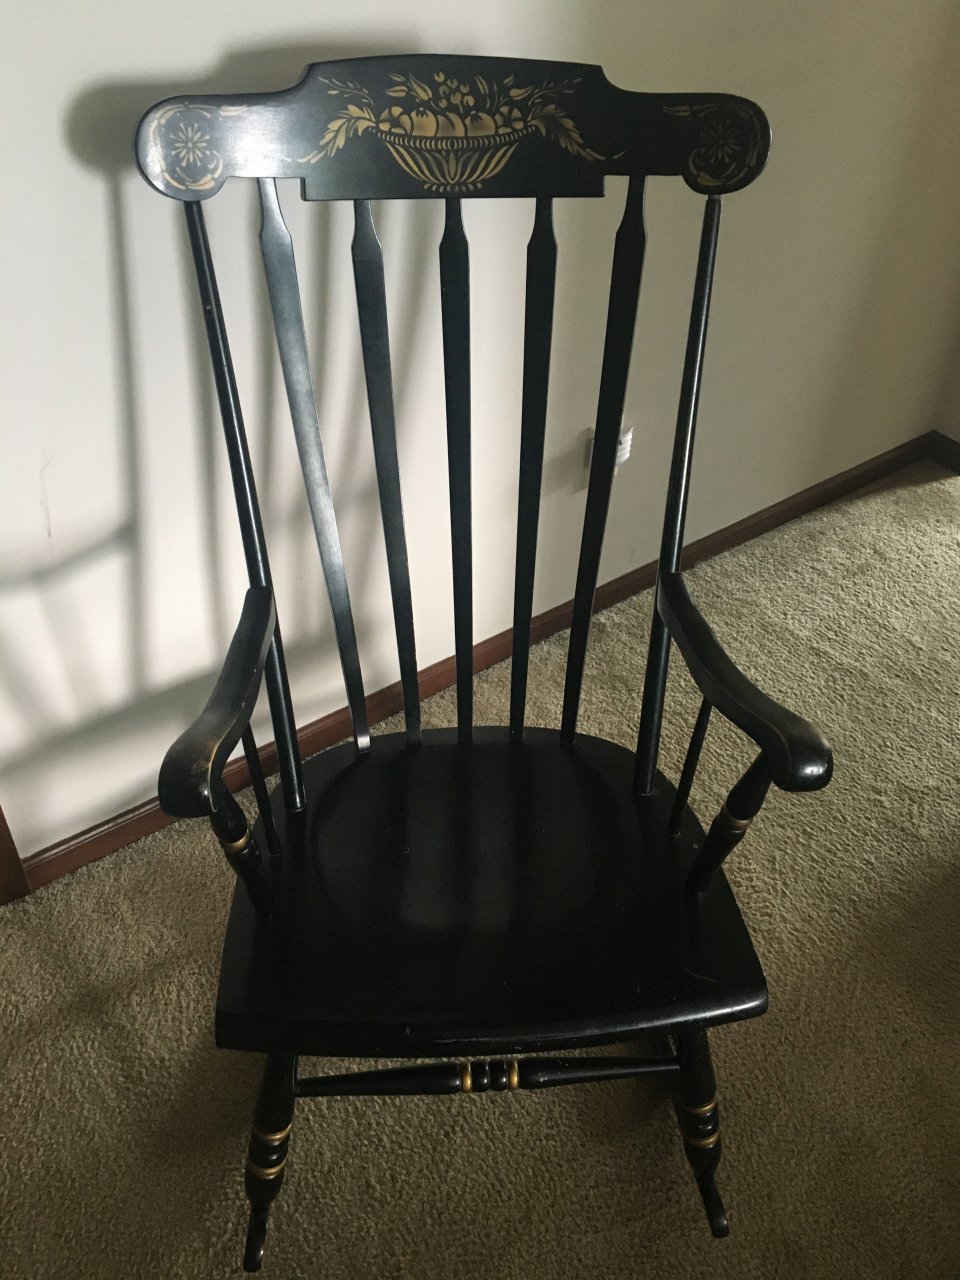 What Is The Value Of This Antique Rocking Chair? | My Antique Furniture